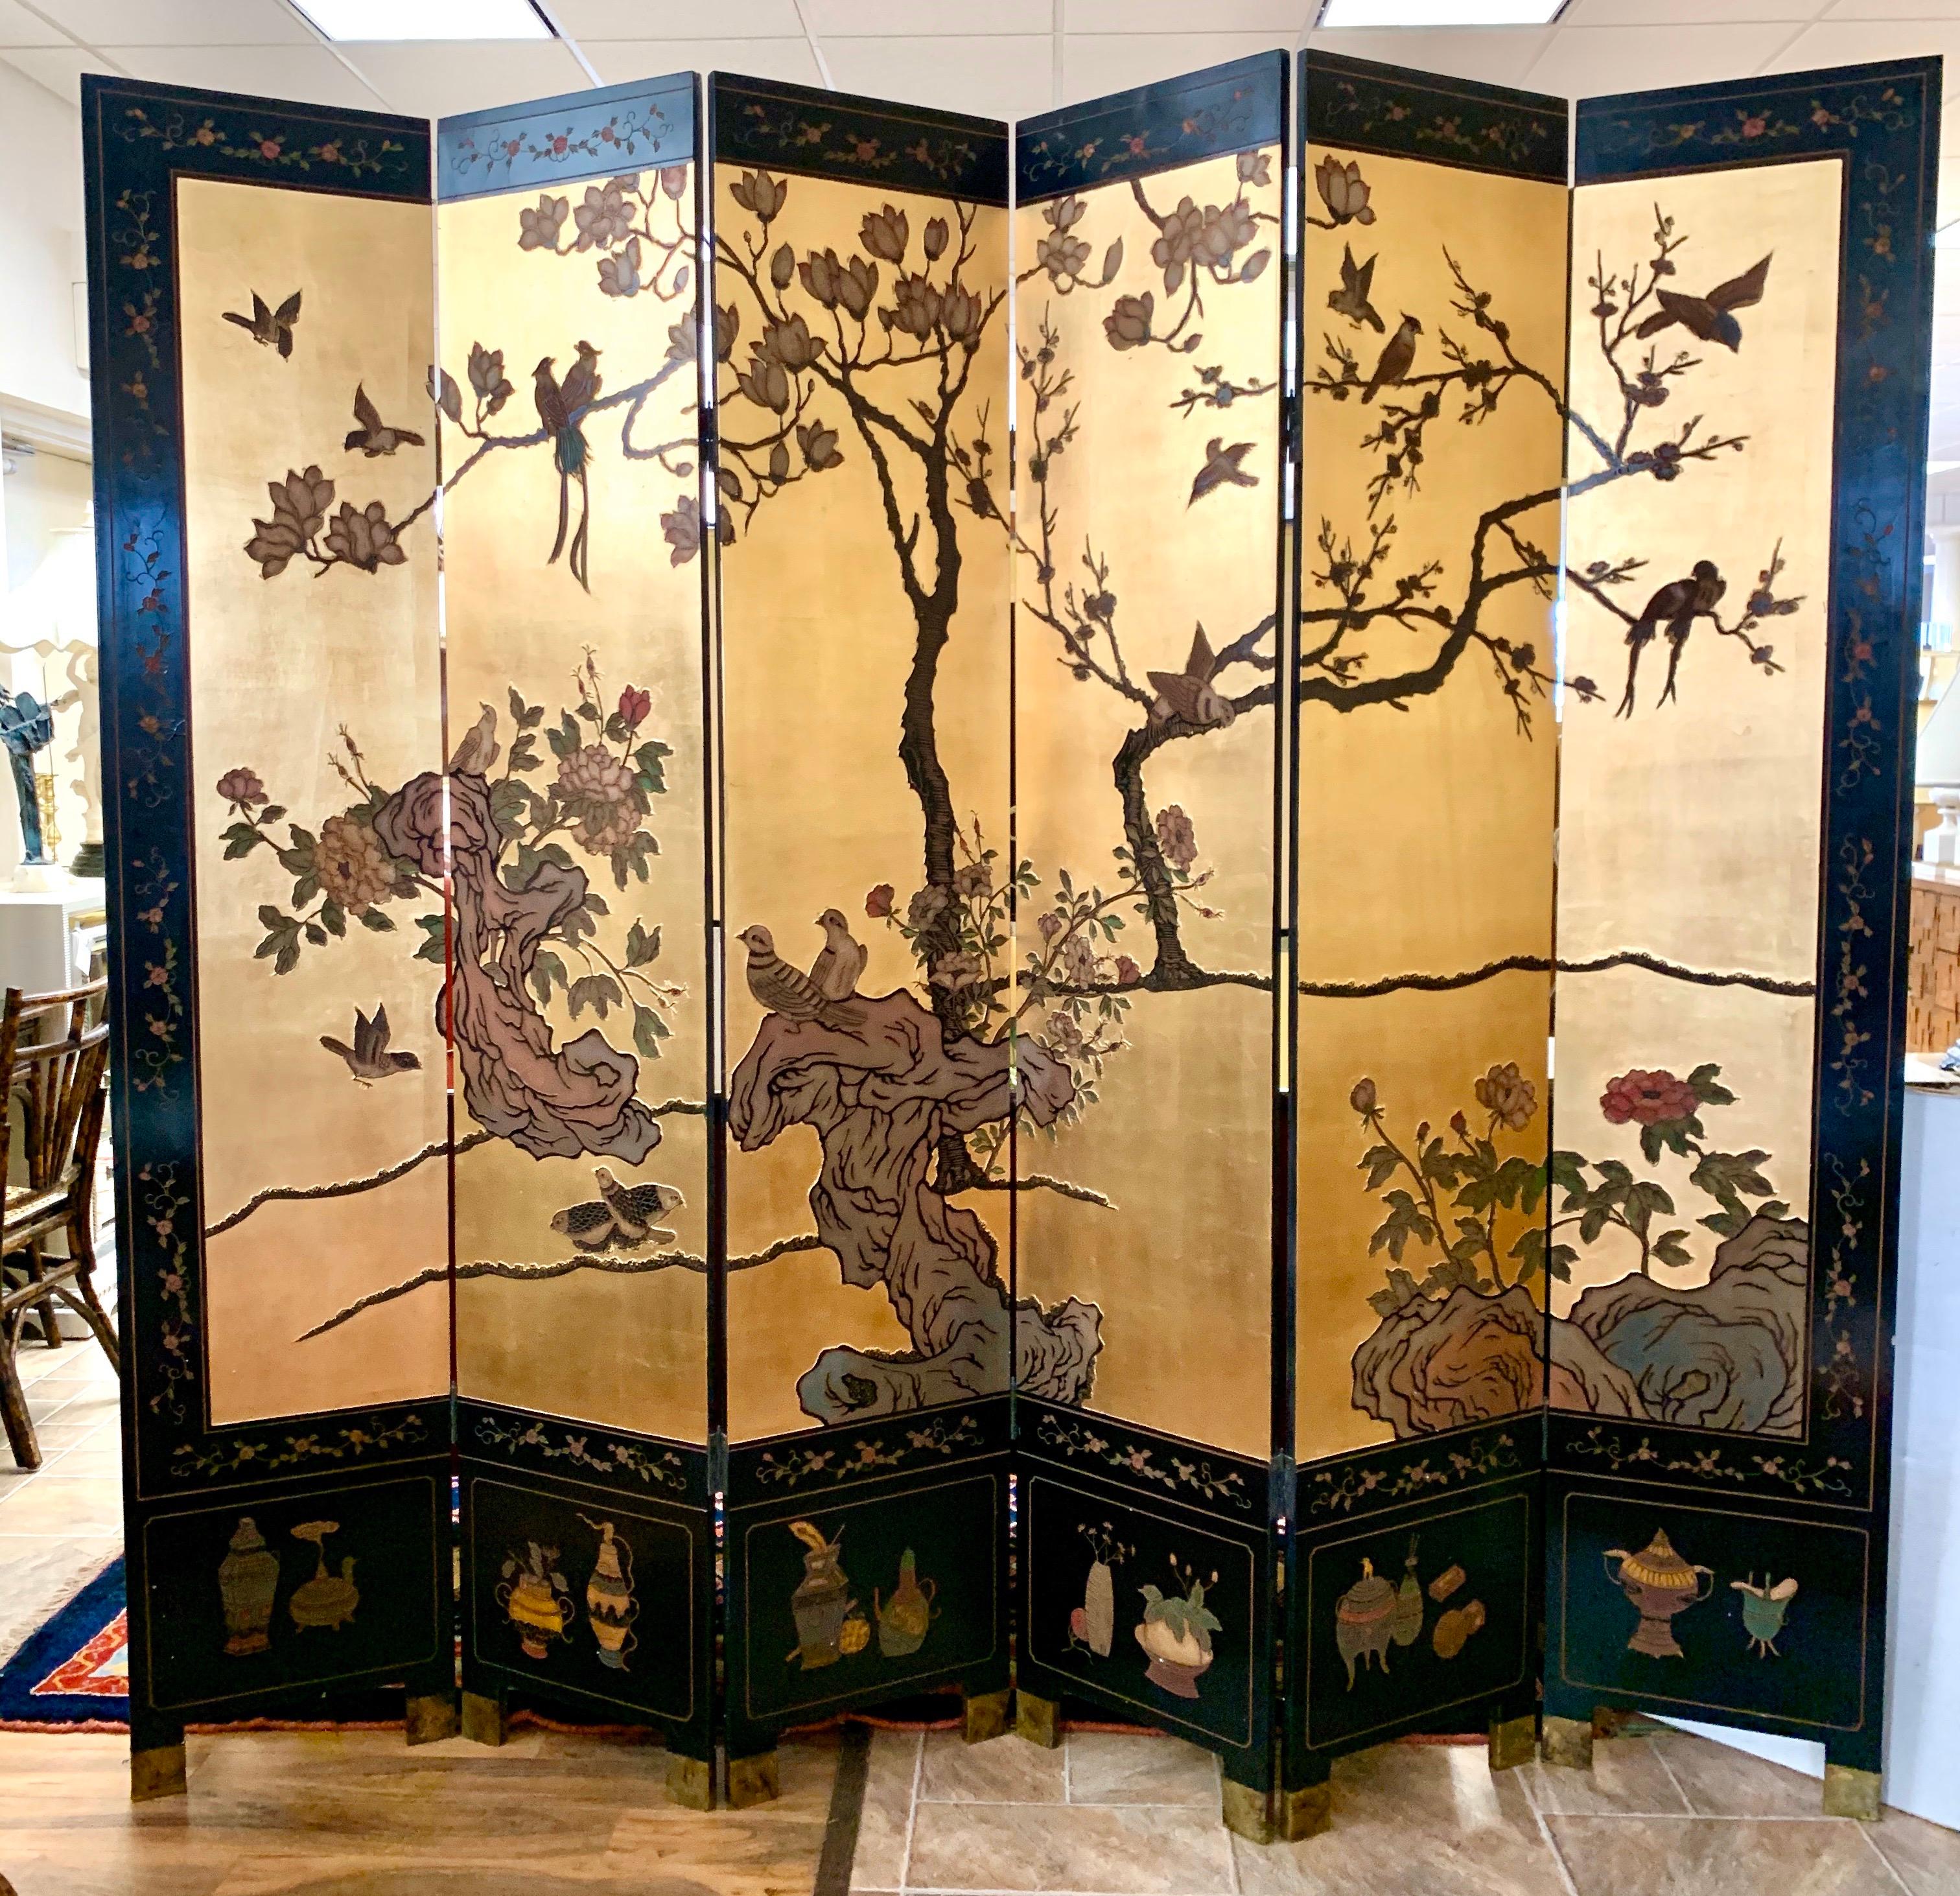 Stunning six-panel midcentury gold leaf expandable screen that measures seven feet tall
and expands up to eight feet when full opened. Magnificent gold leaf throughout. The hand carvings are impressive and the brass footings compliment the screen.